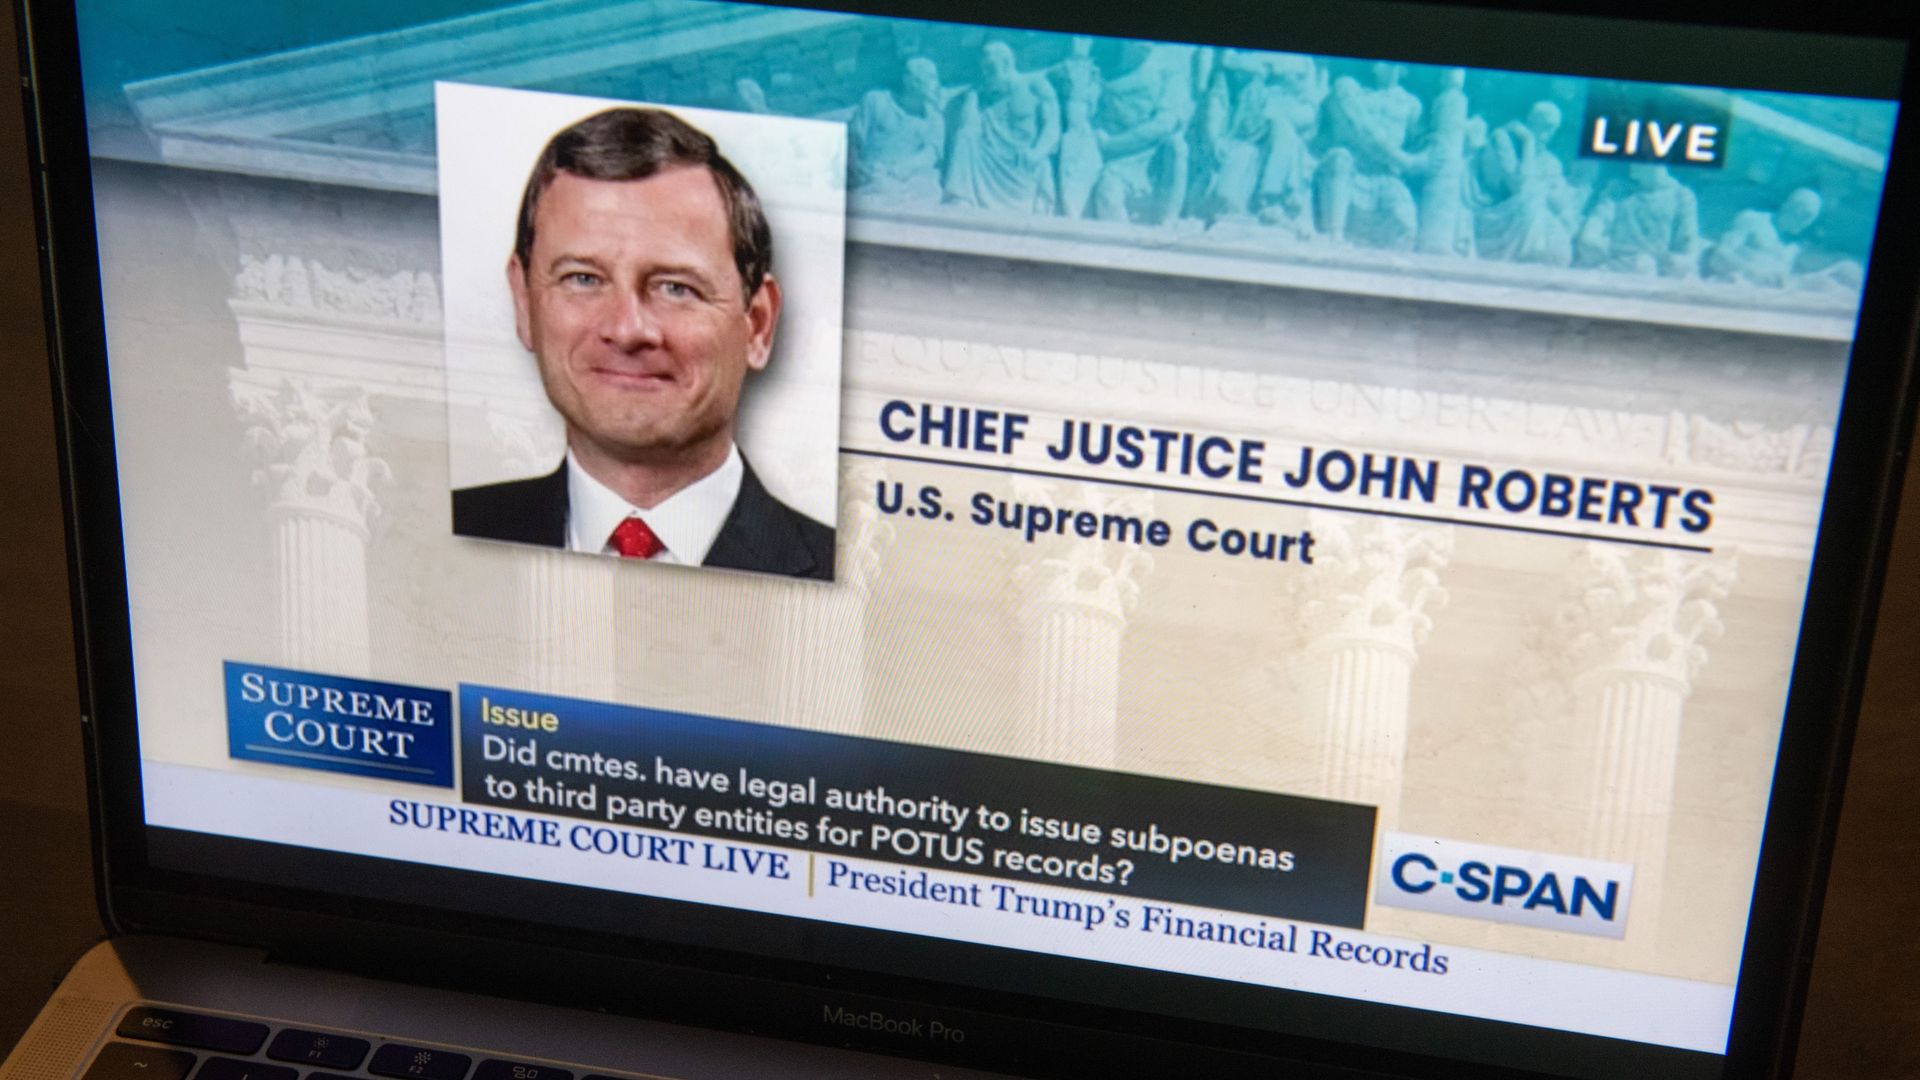 Chief Justice of the US, John Roberts speaks via an audio feed of Supreme Court oral arguments